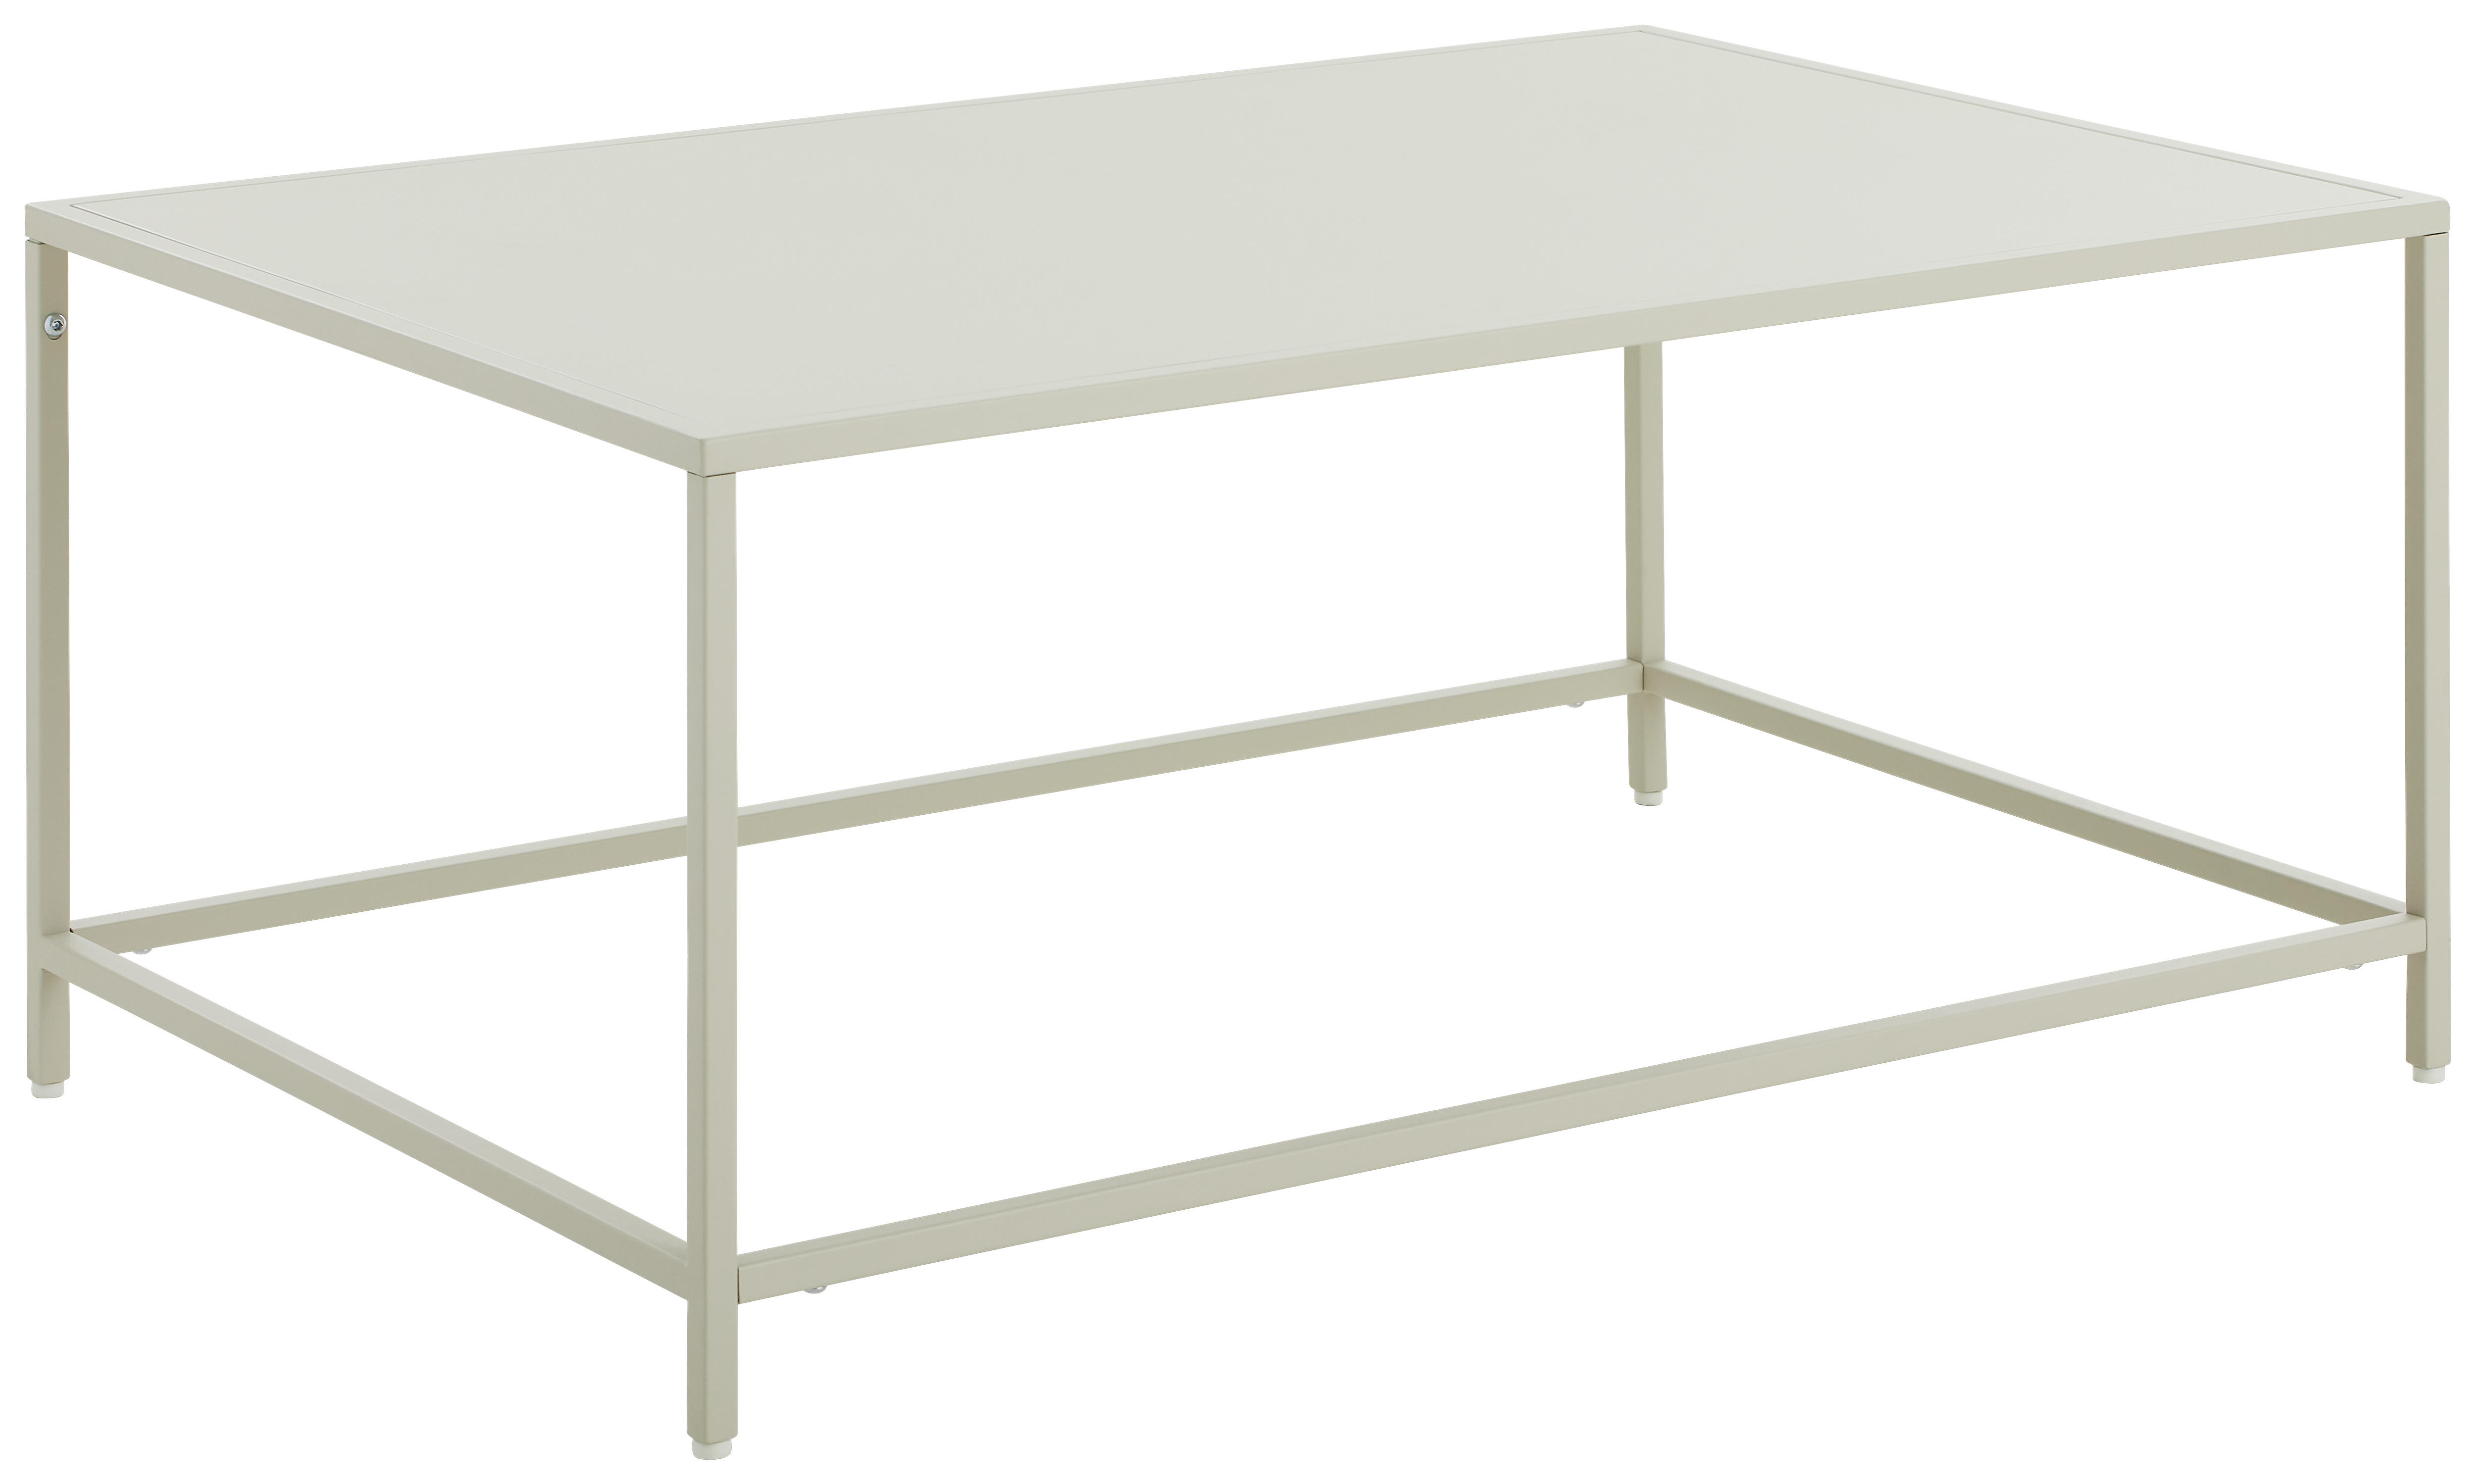 COUCHTISCH in Metall 60/90/40 cm  - Silberfarben/Creme, Basics, Metall (60/90/40cm) - MID.YOU